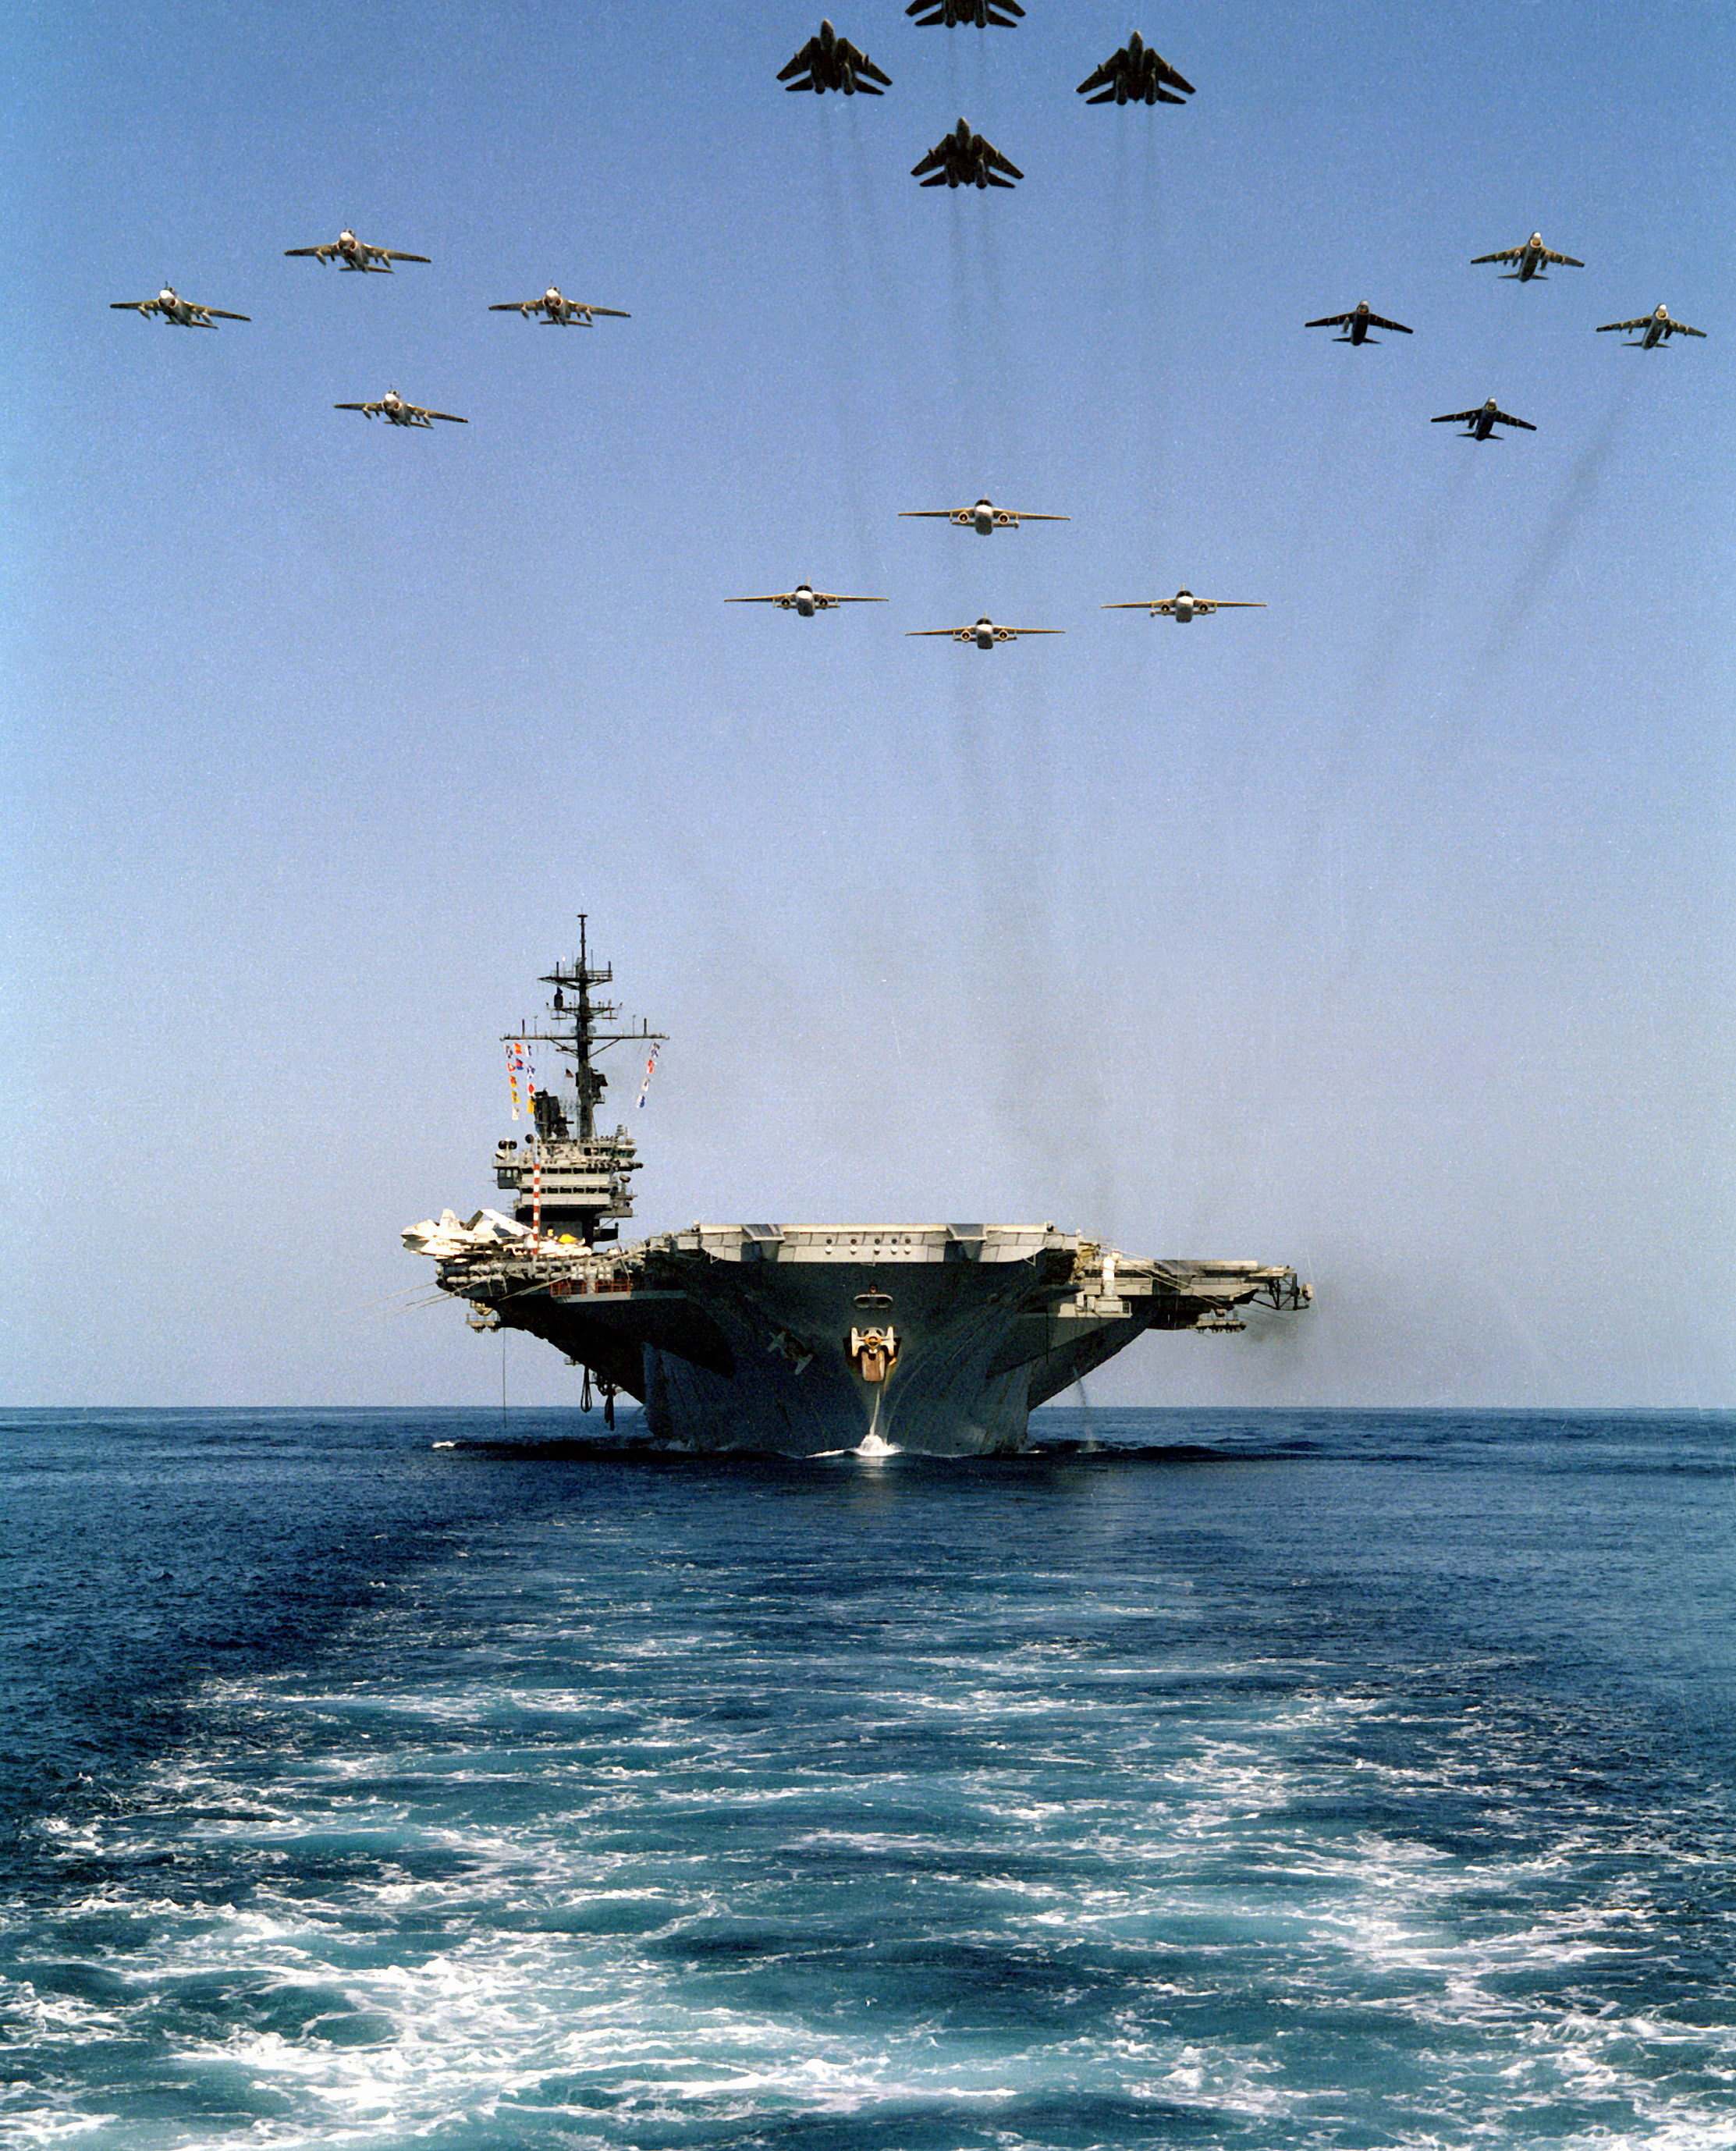 A bow view of the aircraft carrier USS AMERICA (CV-66) underway as16 aircraft from Carrier Air Wing One (CVW-1) fly overhead.